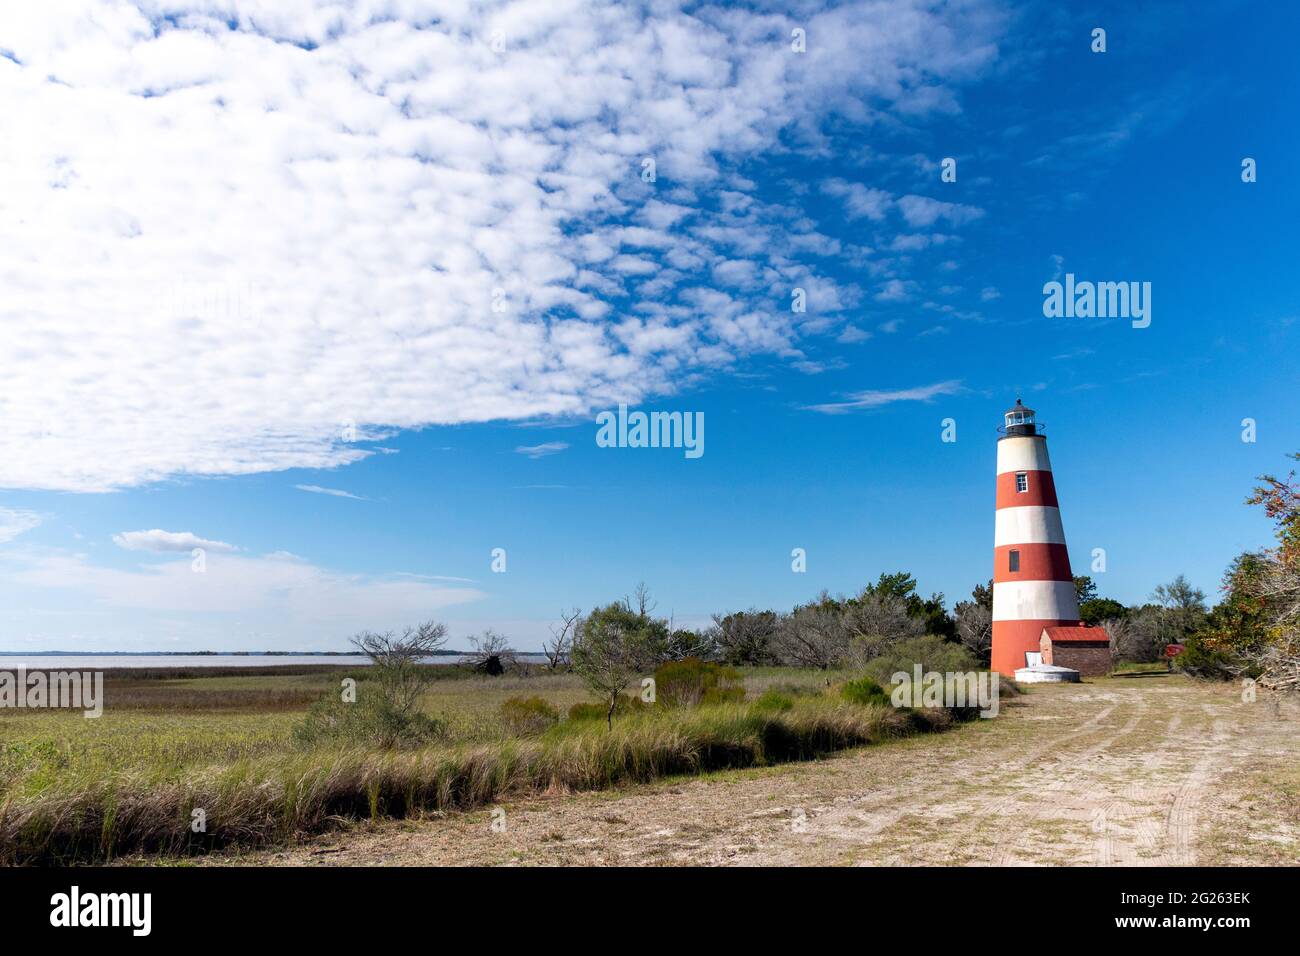 The lighthouse at Sapelo Island, Georgia, USA, the state's fourth largest barrier island and a slow travel destination. Stock Photo